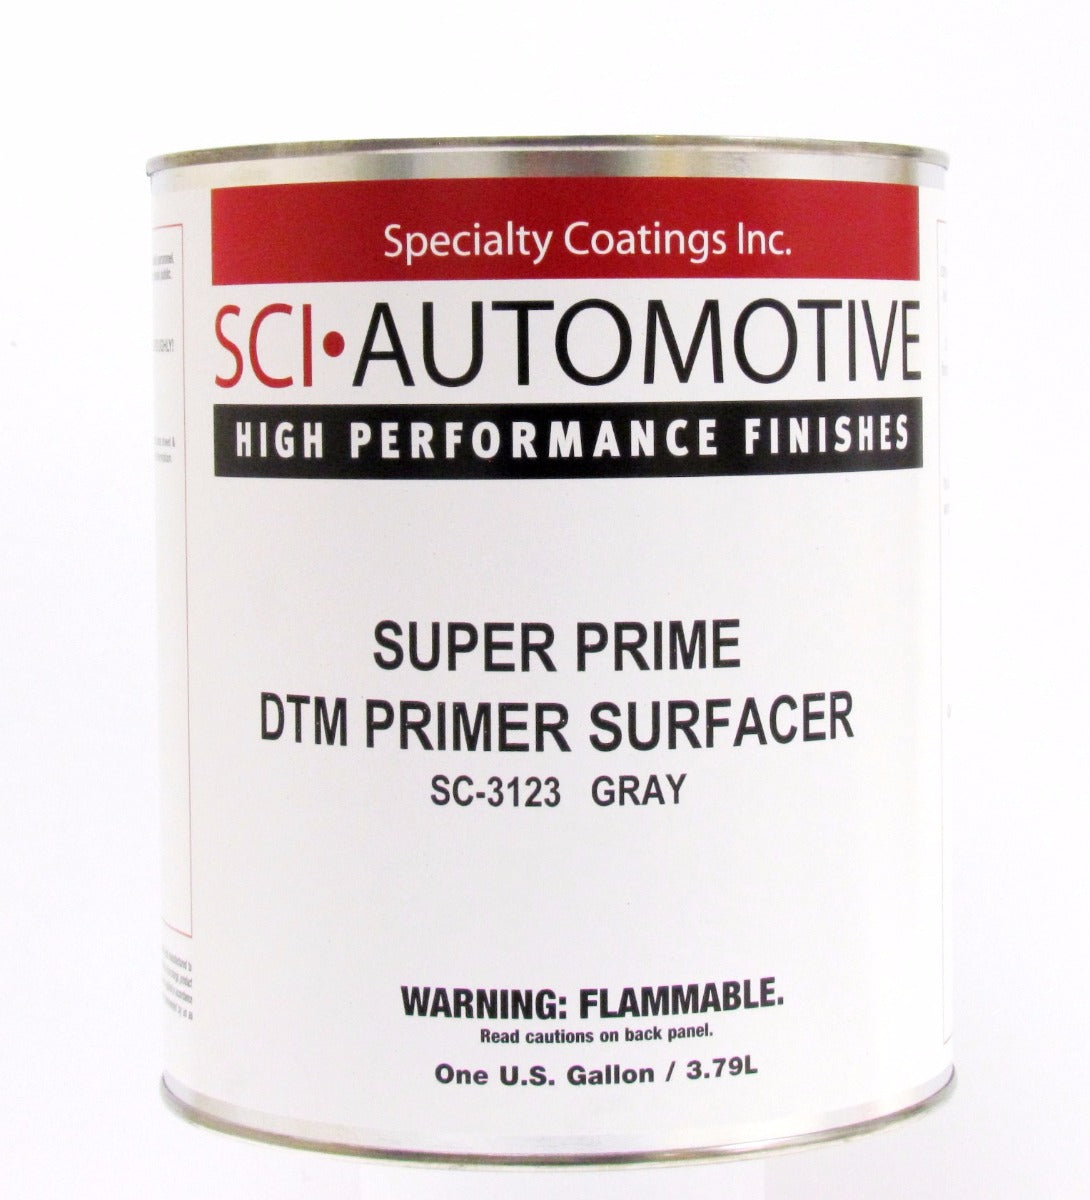 Direct To Metal PRIMER SURFACER GRAY – Specialty Coatings Inc.